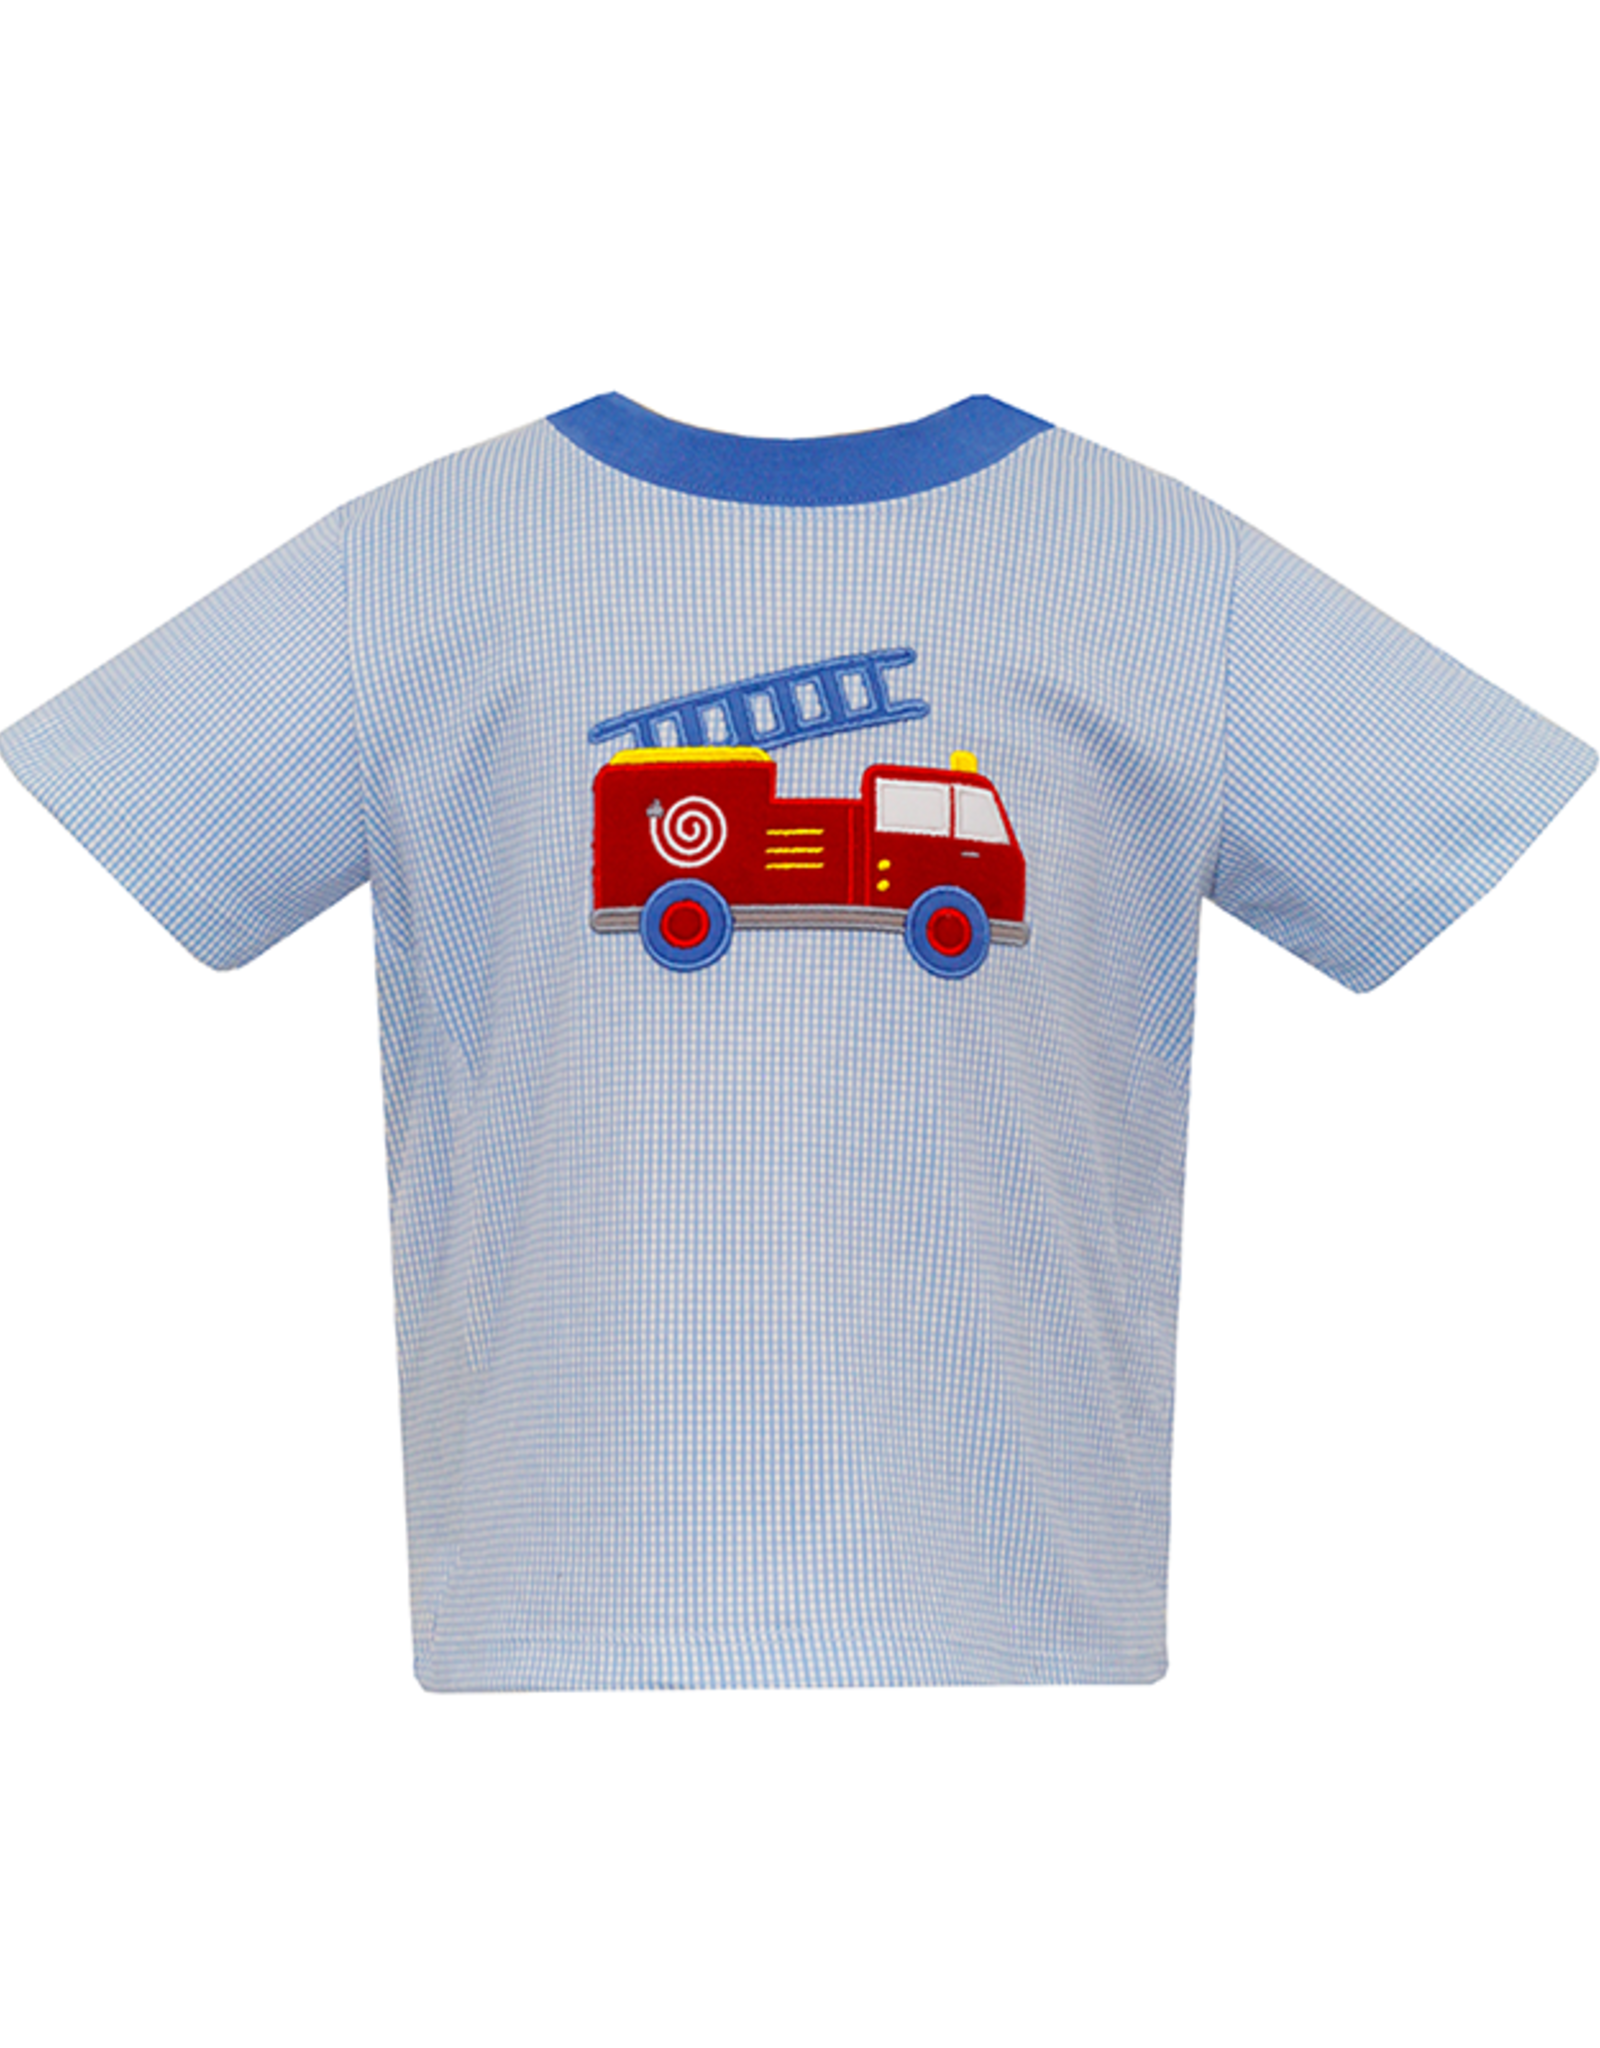 Claire and Charlie 5051P Gingham Firetruck Shirt